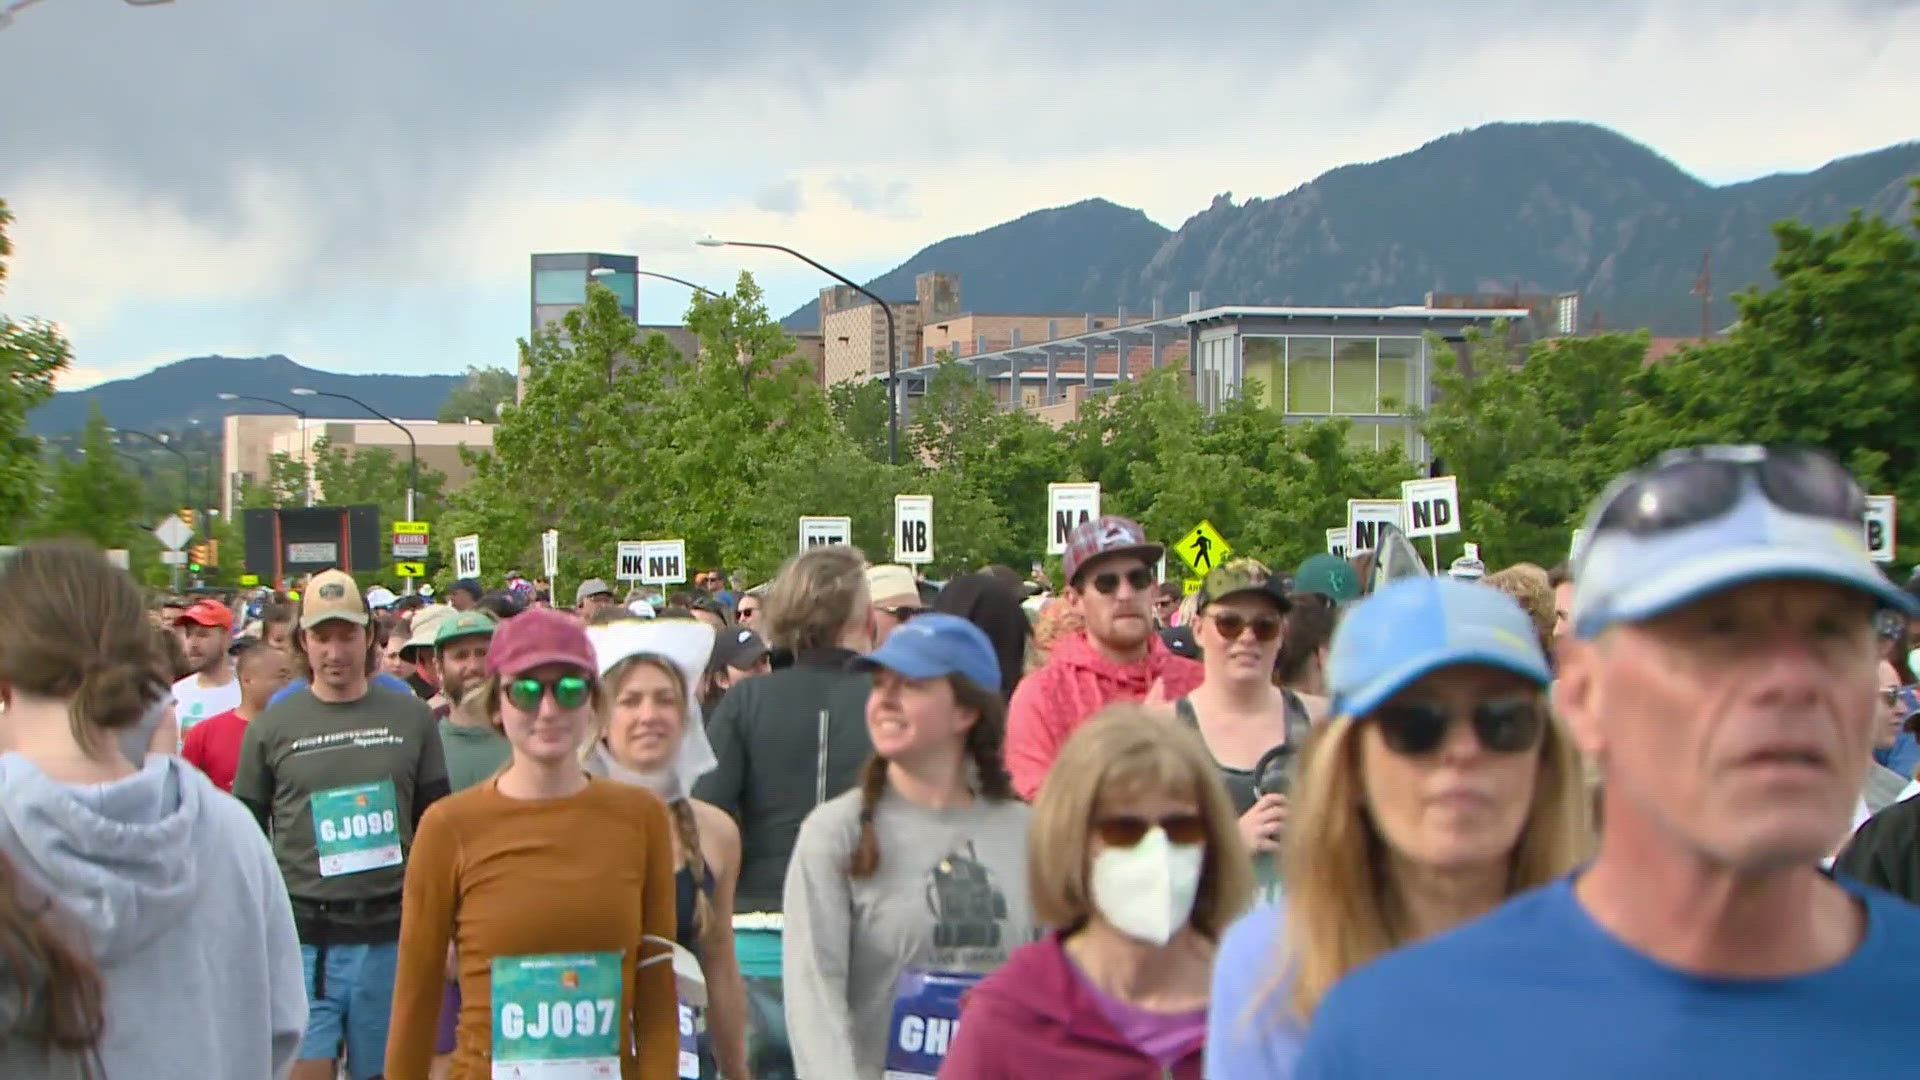 The annual Bolder Boulder 10K starts Monday morning and will include a Memorial Day tribute.